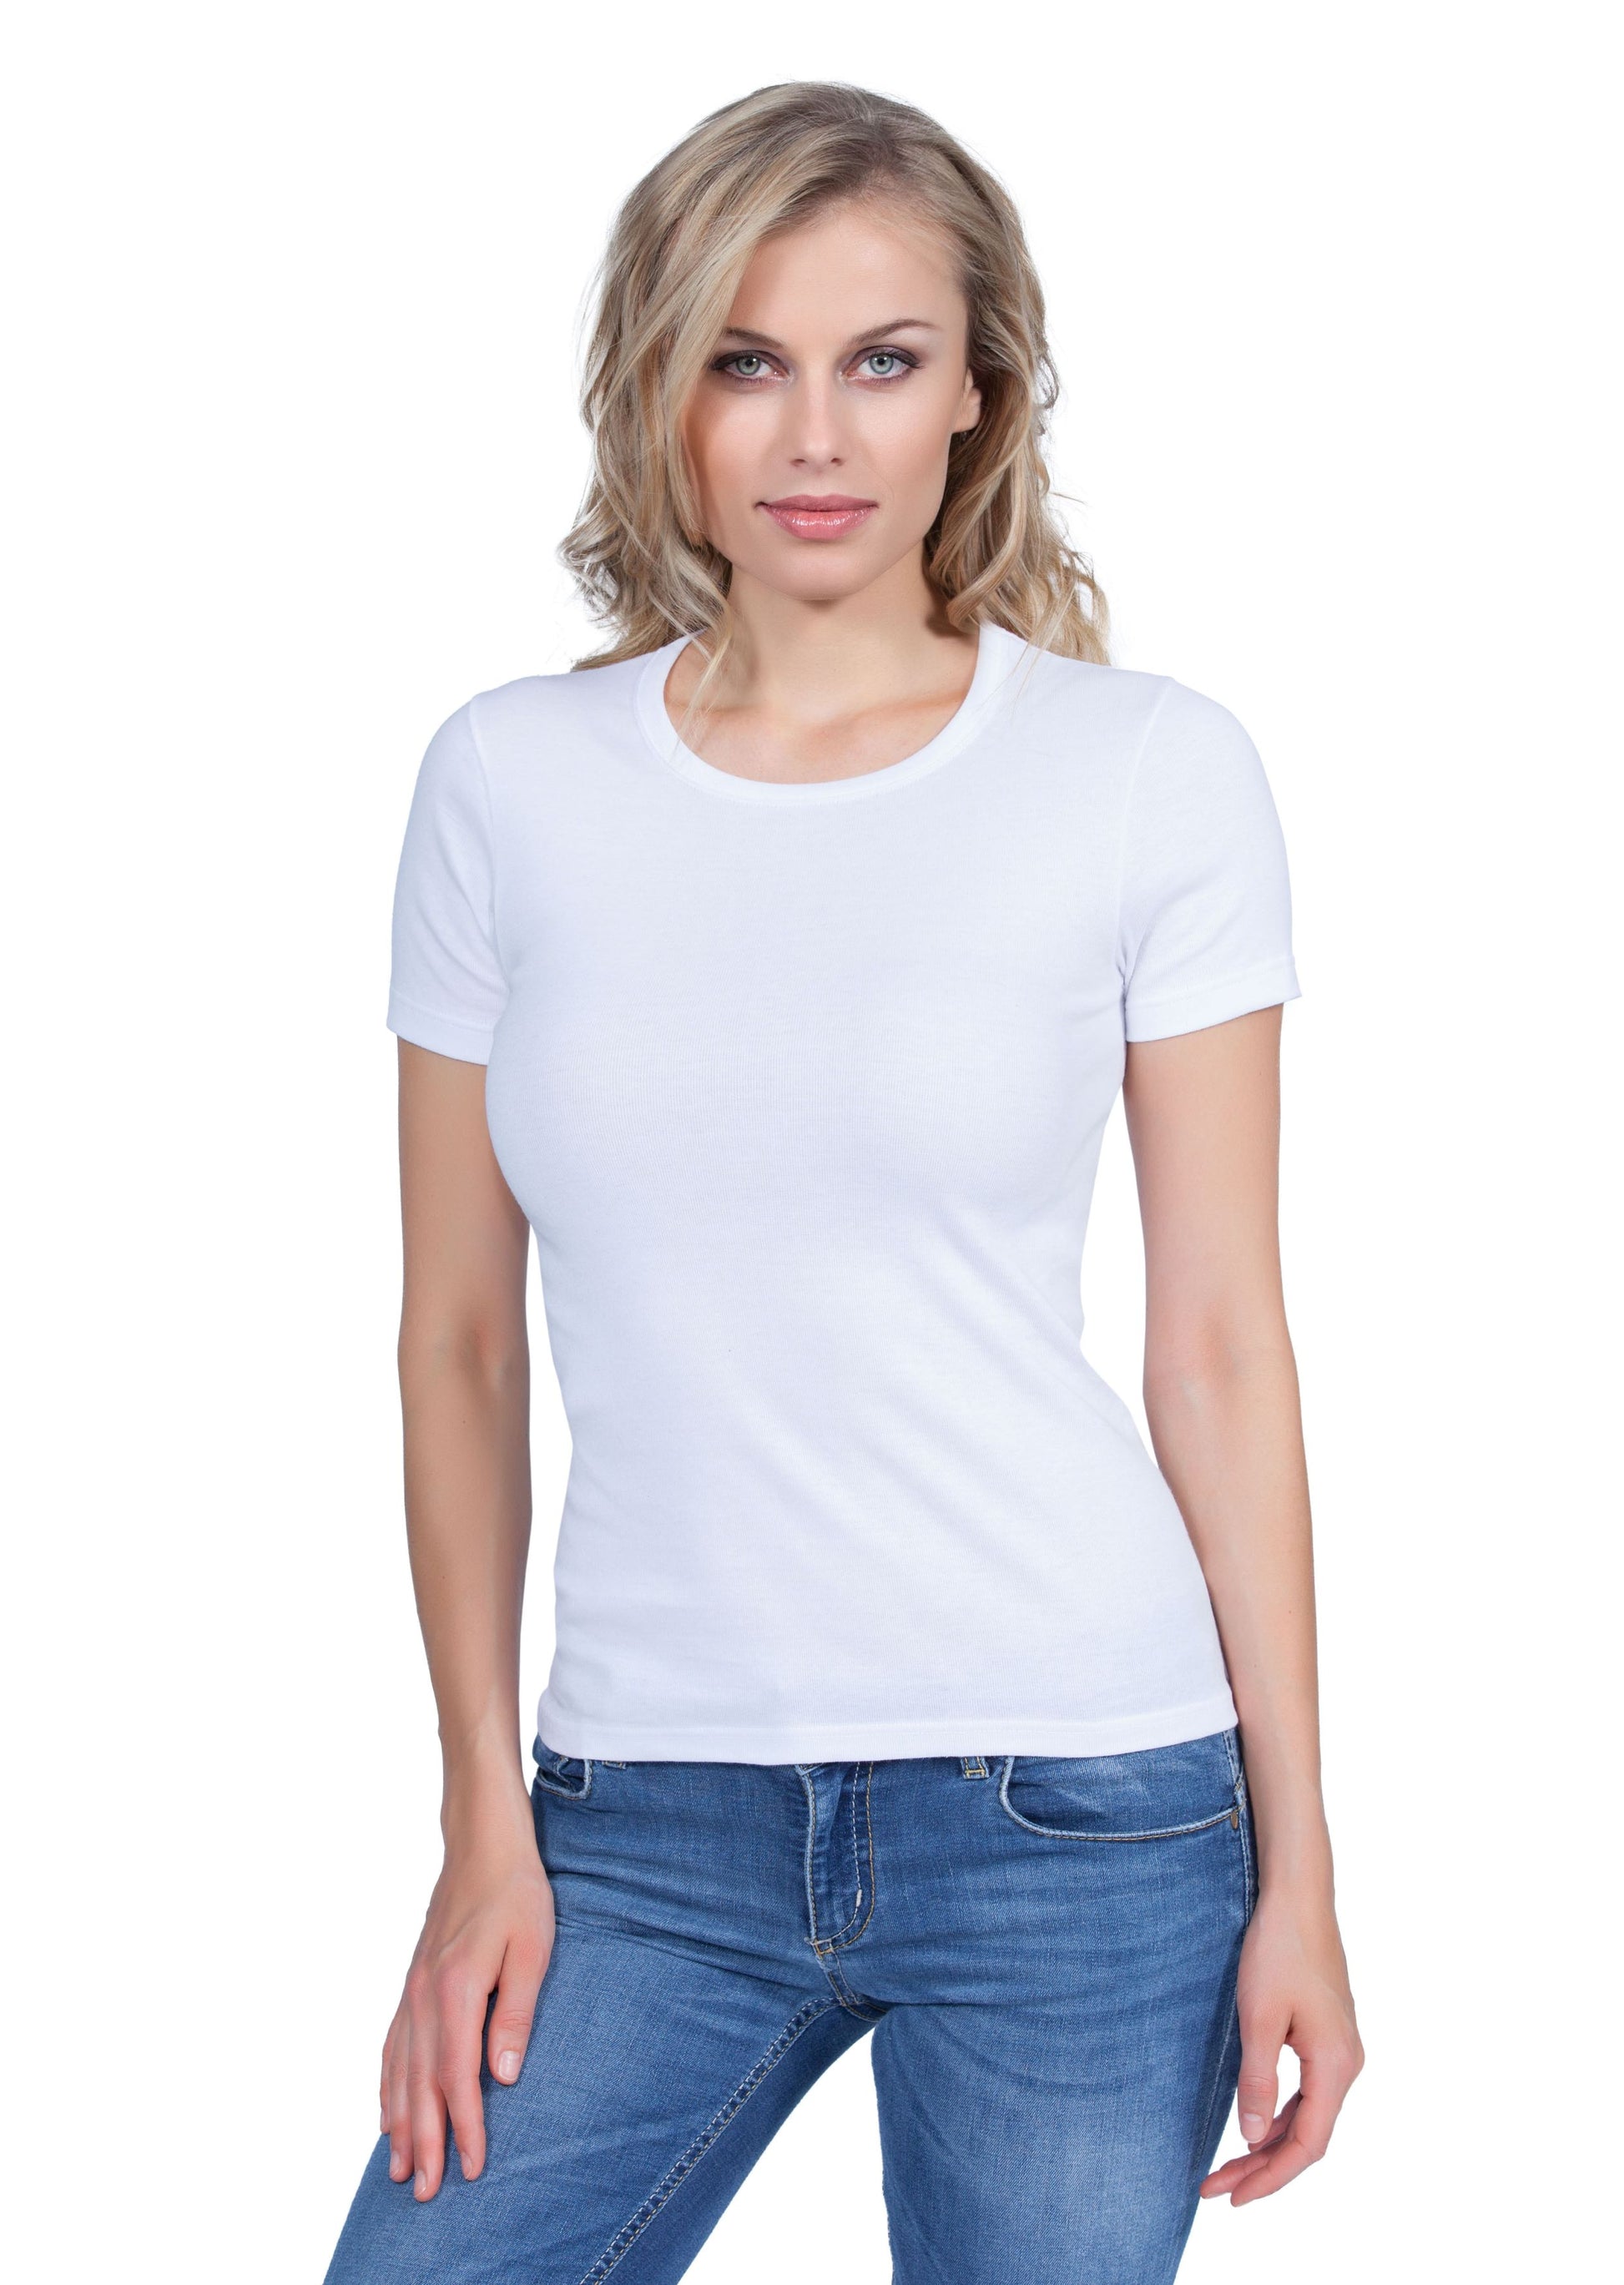 This Italian-crafted Ribbed Cotton Top is created with a lightweight cotton fabric woven with a tubular knit, providing smooth, uninterrupted sides. 